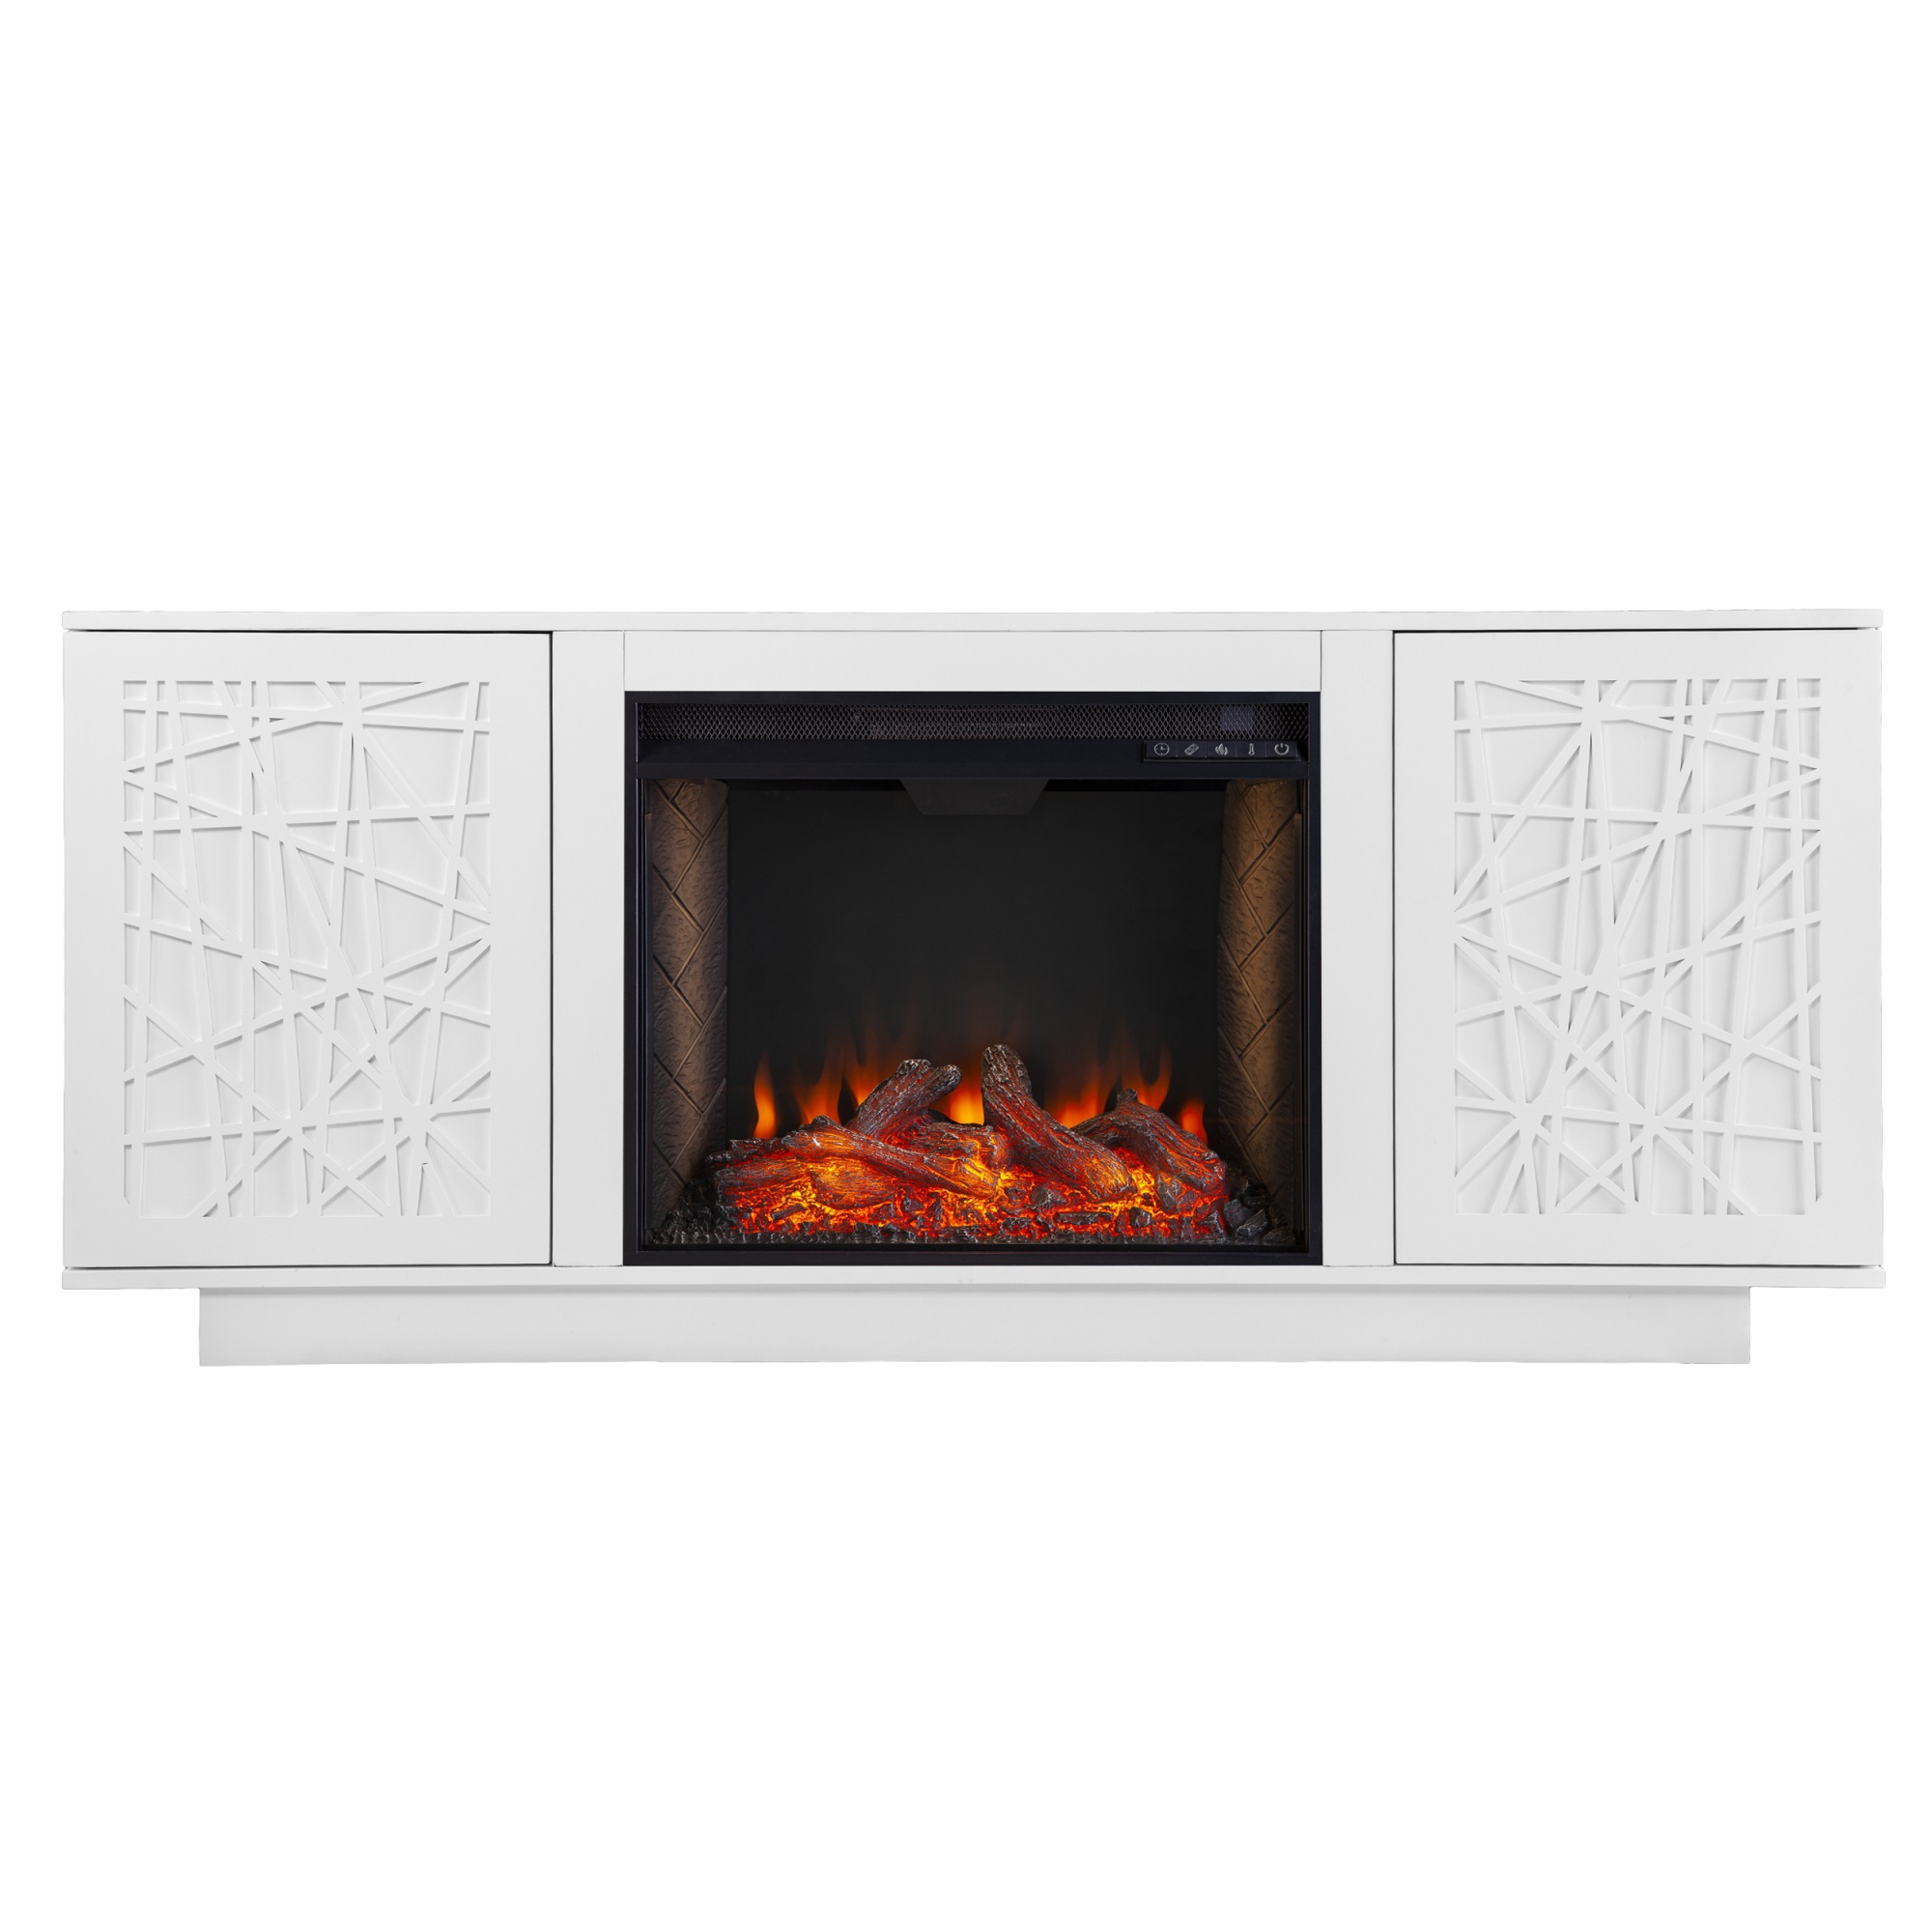 Southern Enterprise Delgrave Smart Fireplace with Media Storage